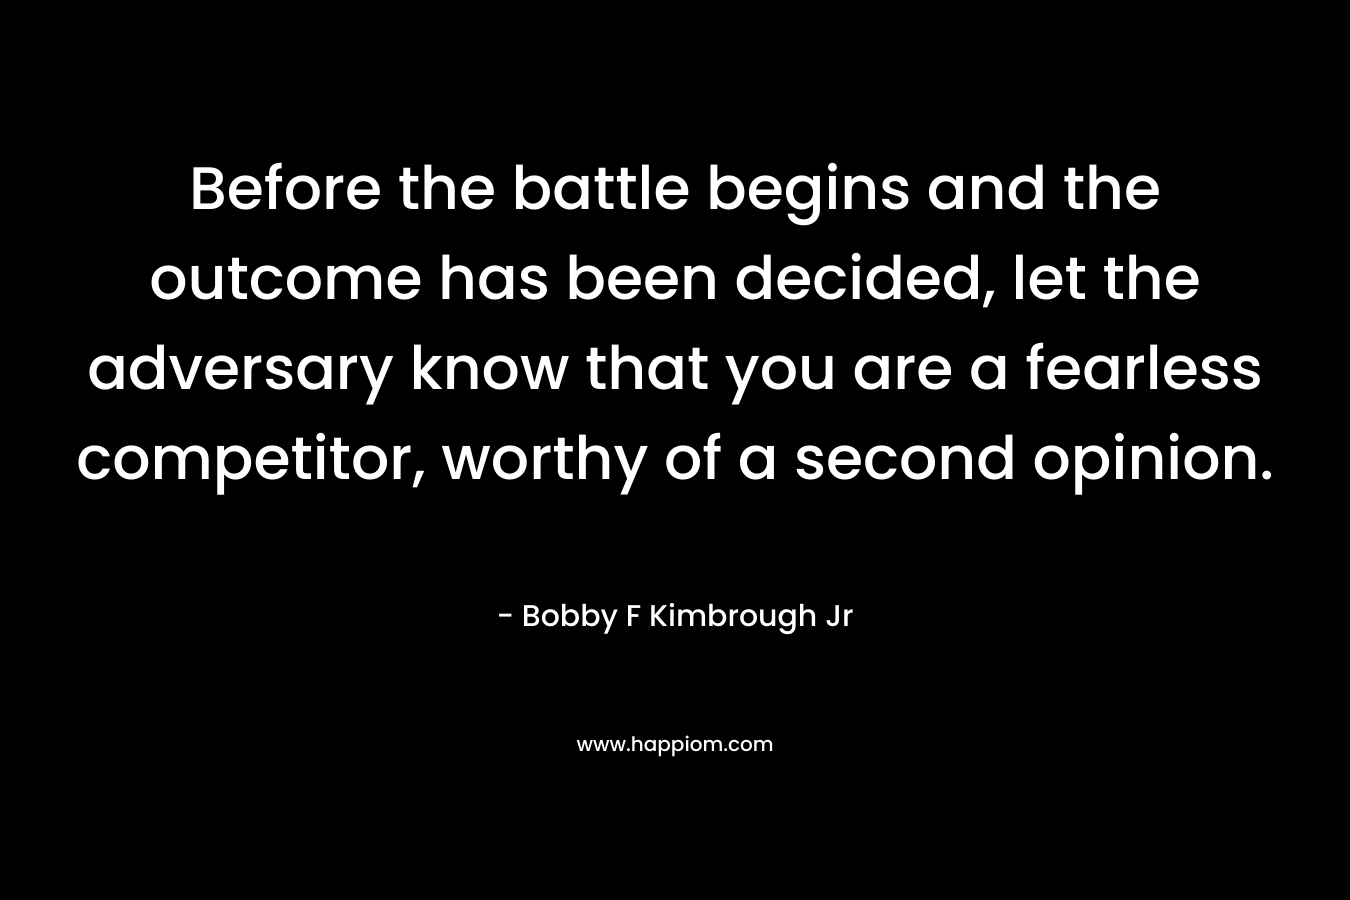 Before the battle begins and the outcome has been decided, let the adversary know that you are a fearless competitor, worthy of a second opinion. – Bobby F Kimbrough Jr